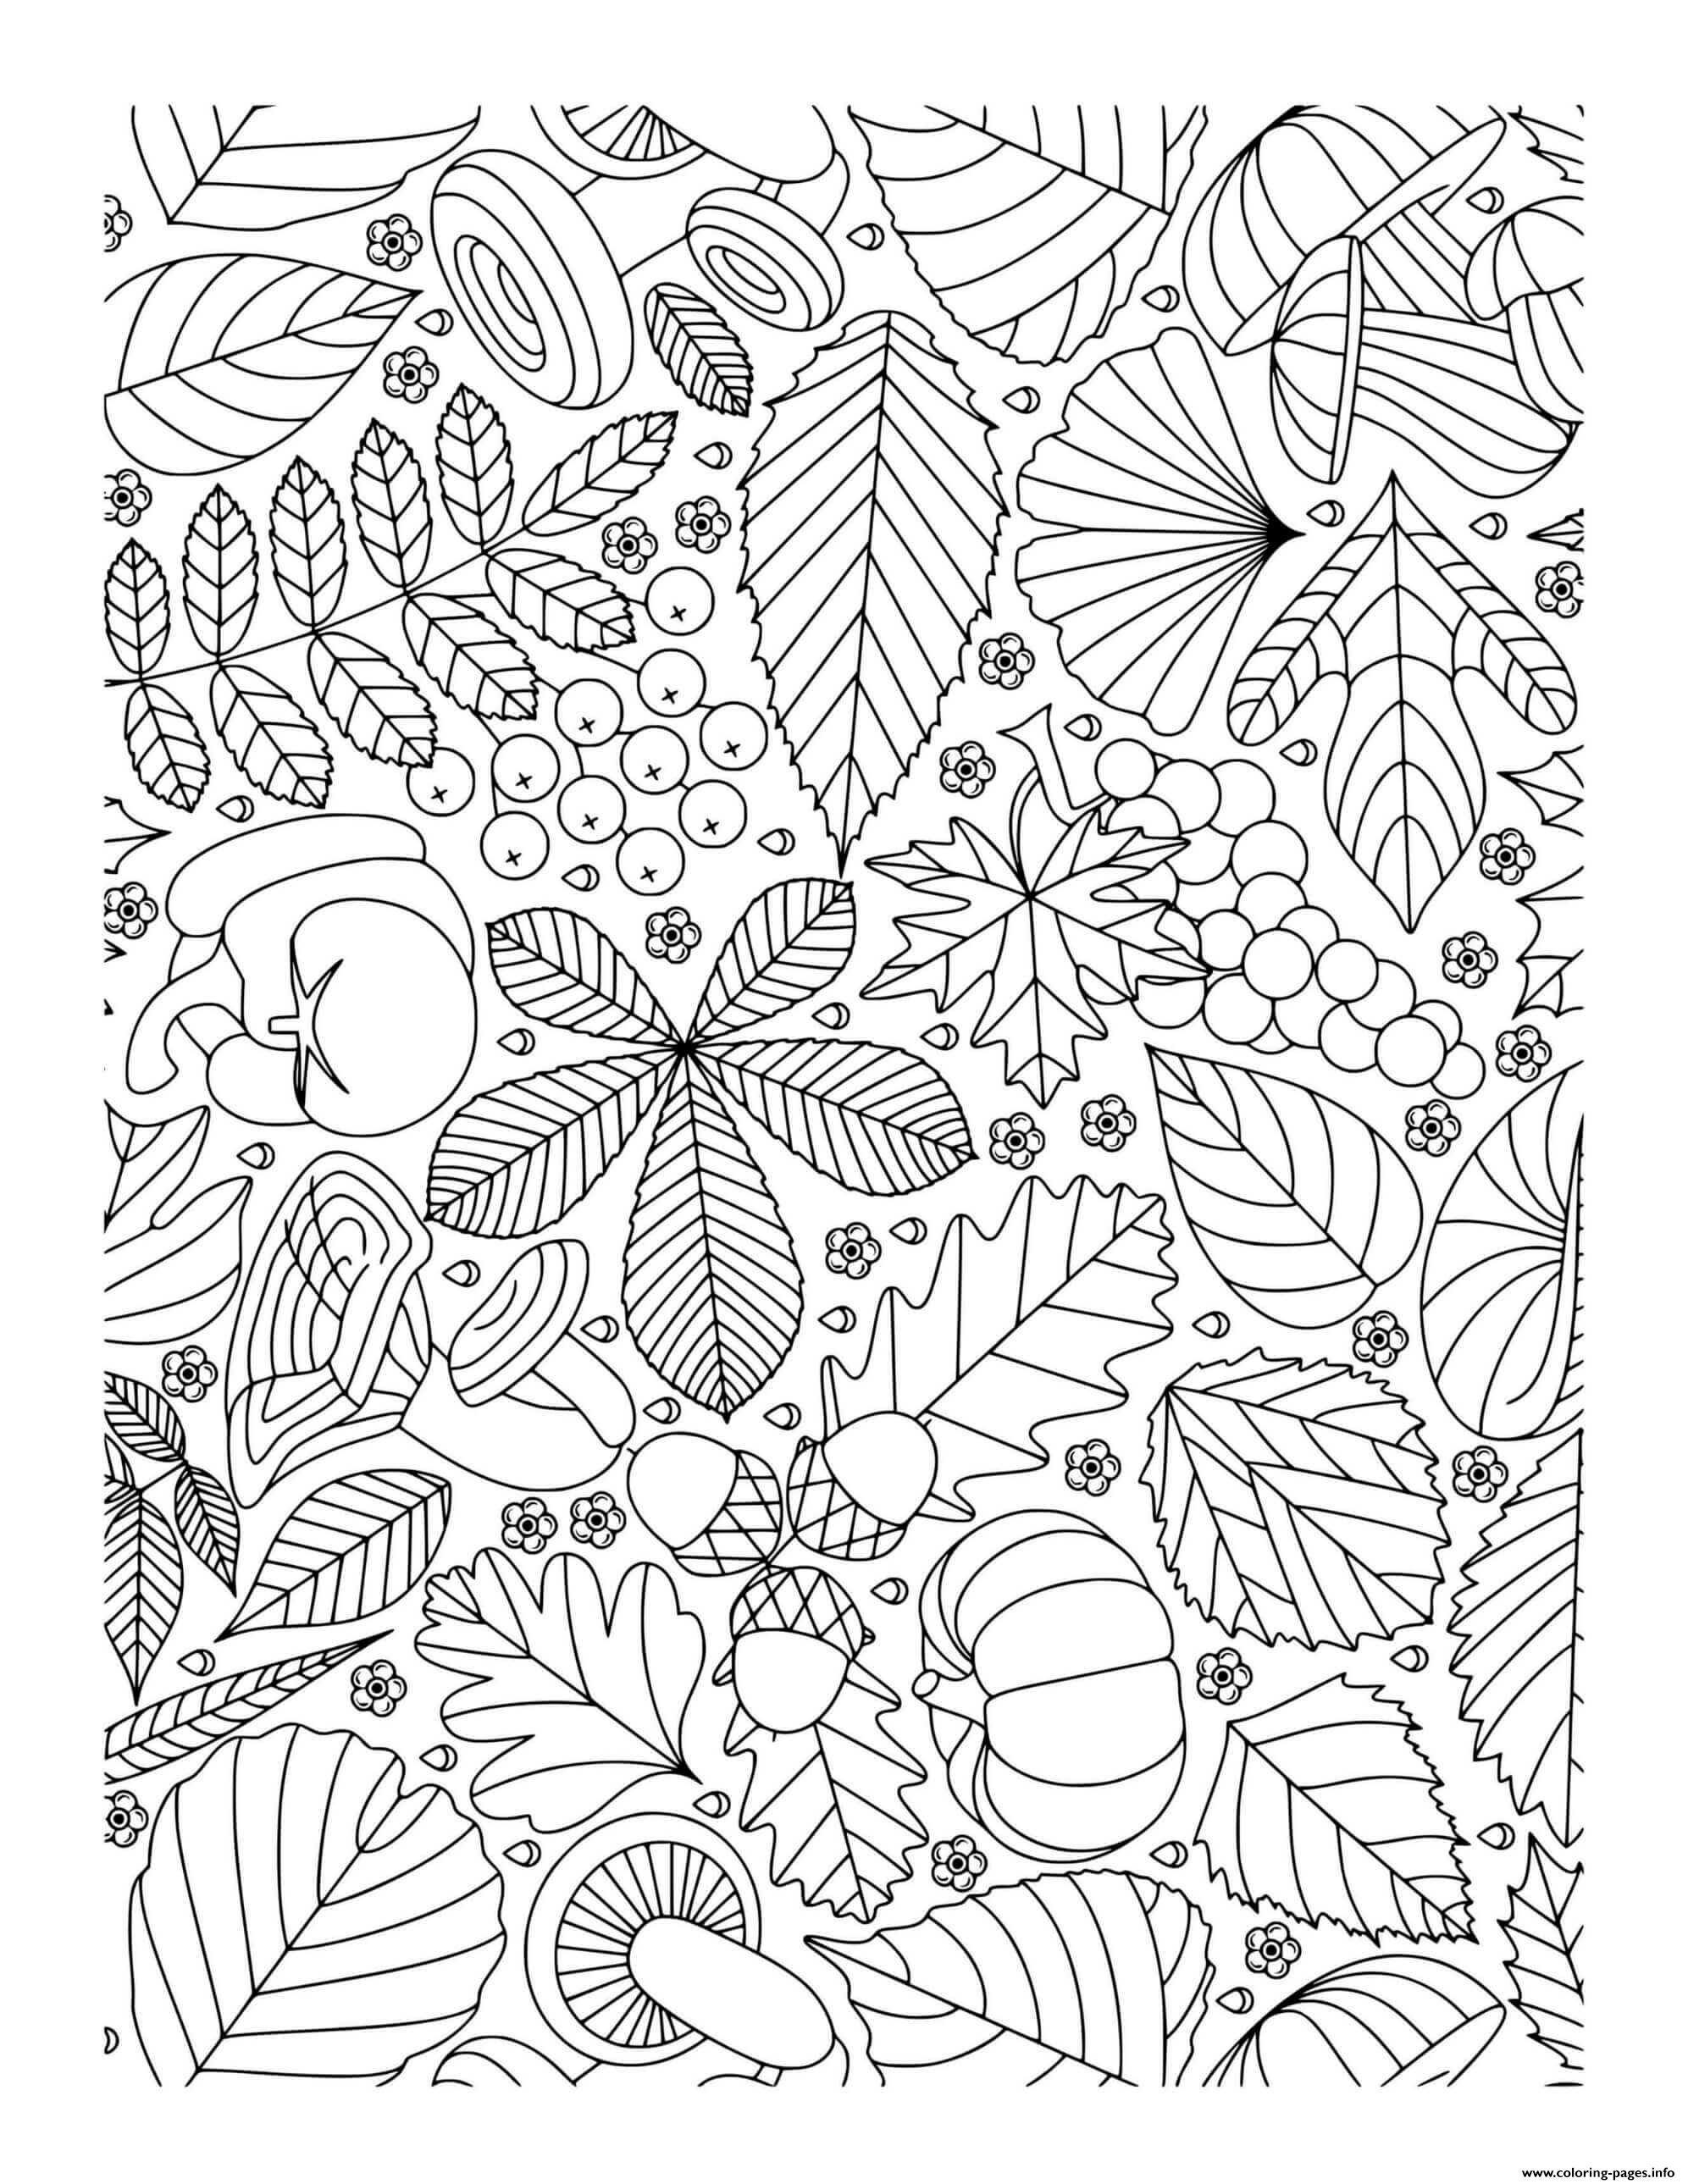  Fall  Autumn  Doodle  For Adults Leaves Mushrooms Grapes 